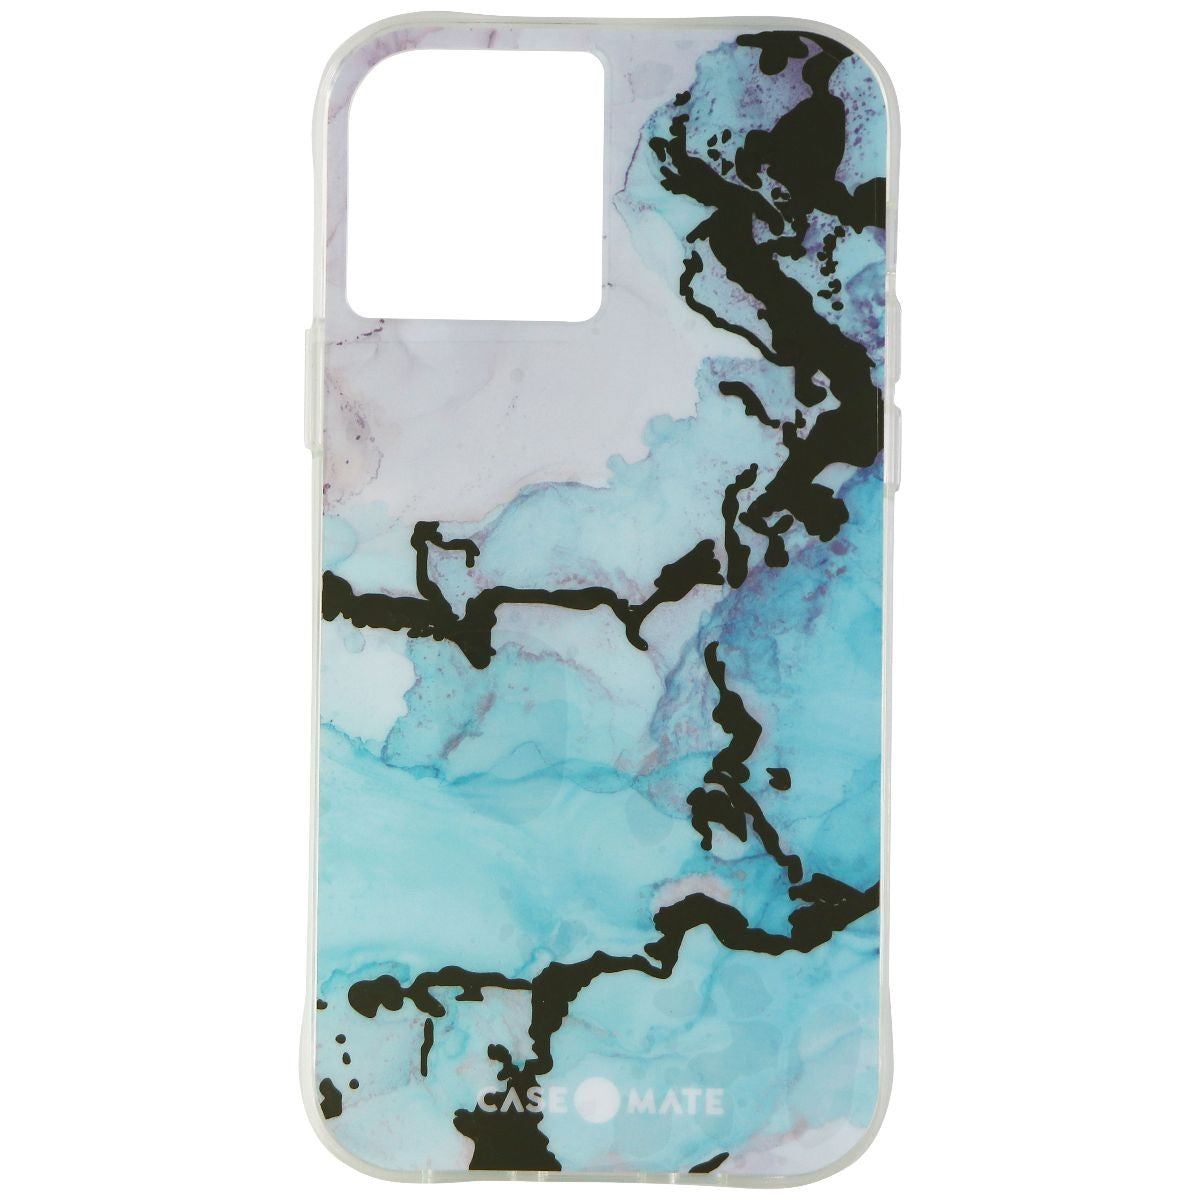 Case-Mate Tough Prints Series Case for iPhone 12 Pro / iPhone 12 - Ocean Marble